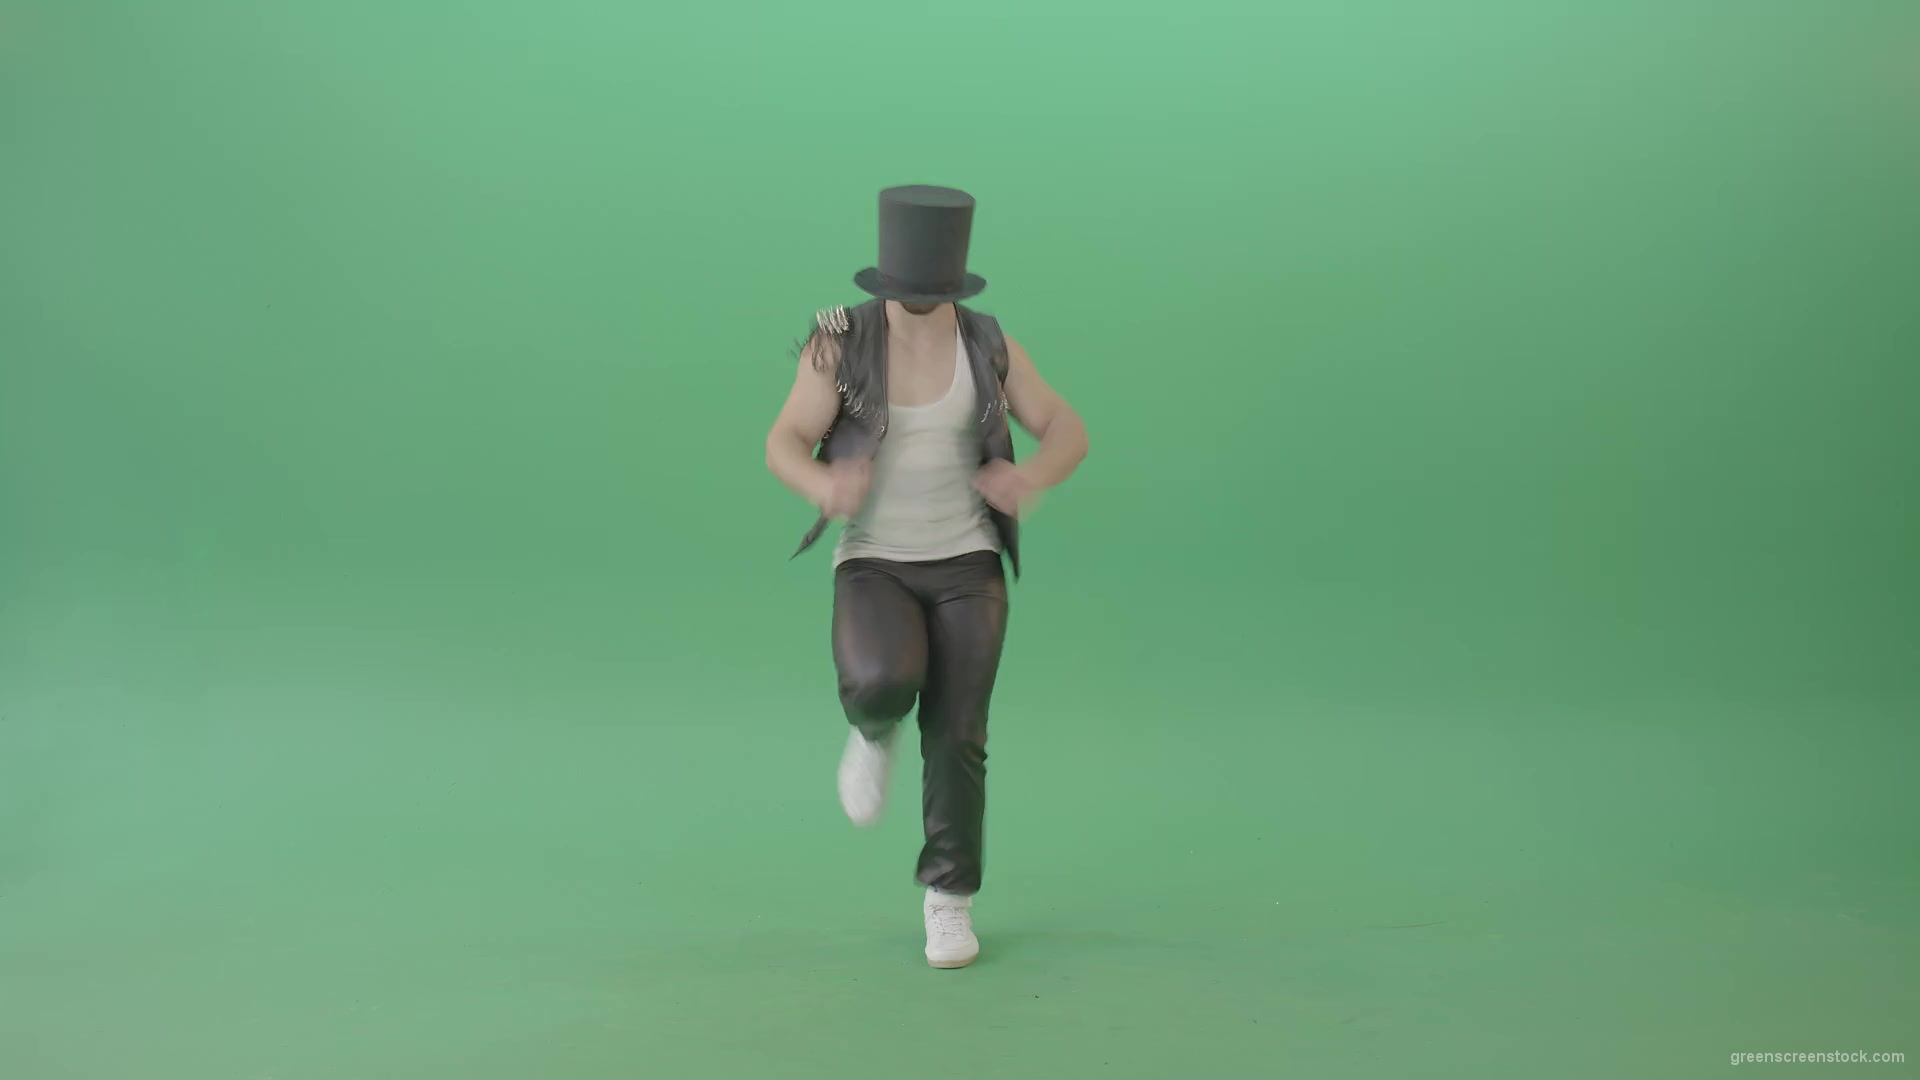 Funny-Man-in-Cylinder-Hat-and-black-fetish-costume-dancing-and-jumping-over-Green-Screen-4K-Video-Footage-1920_007 Green Screen Stock